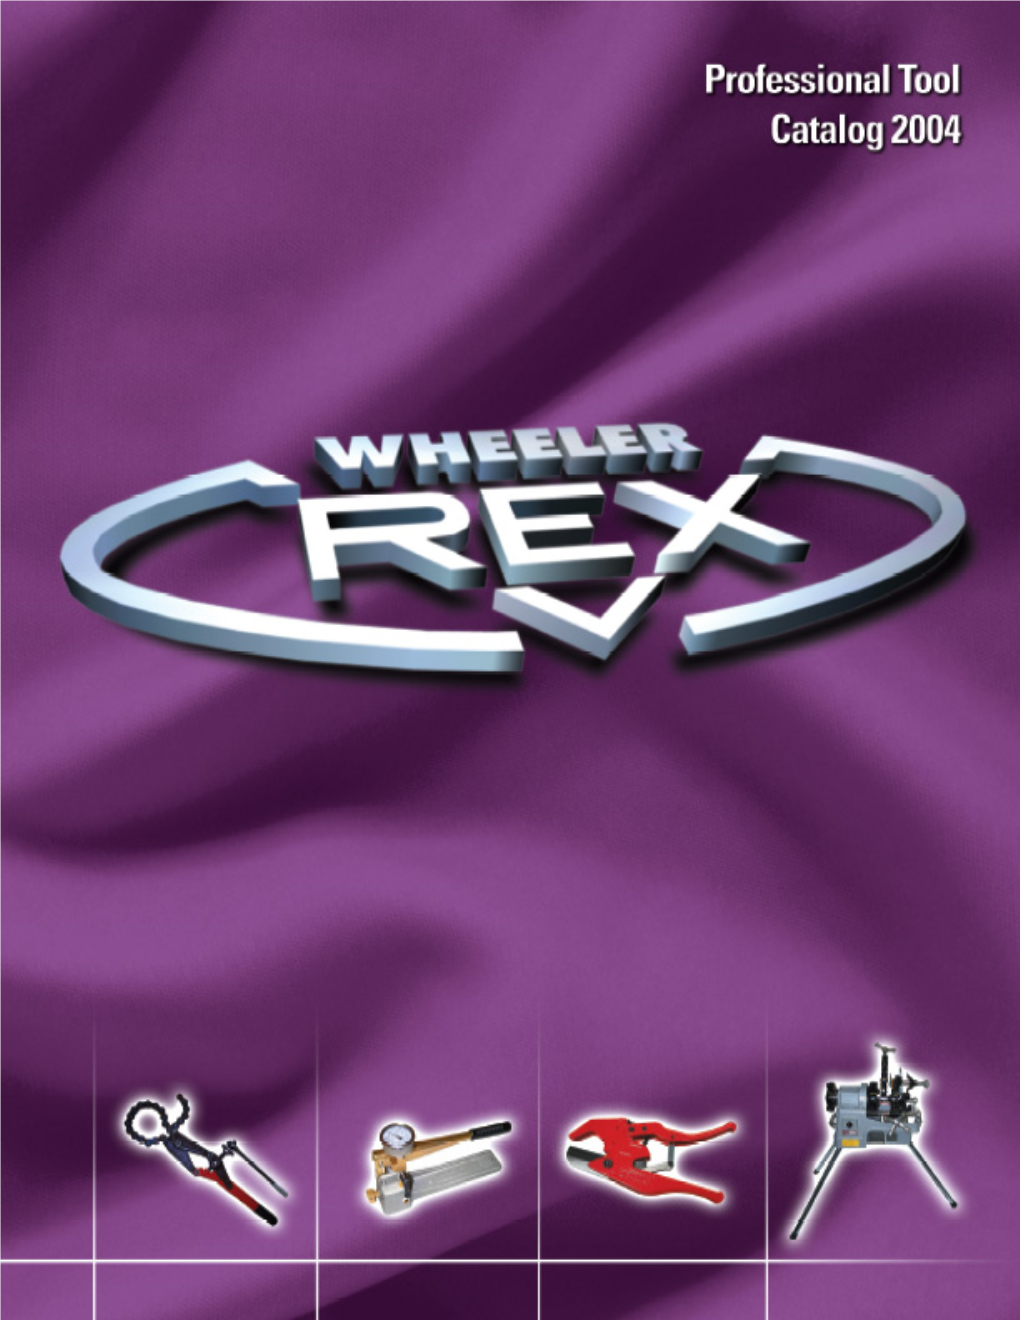 WHEELER-REX Products for 2004